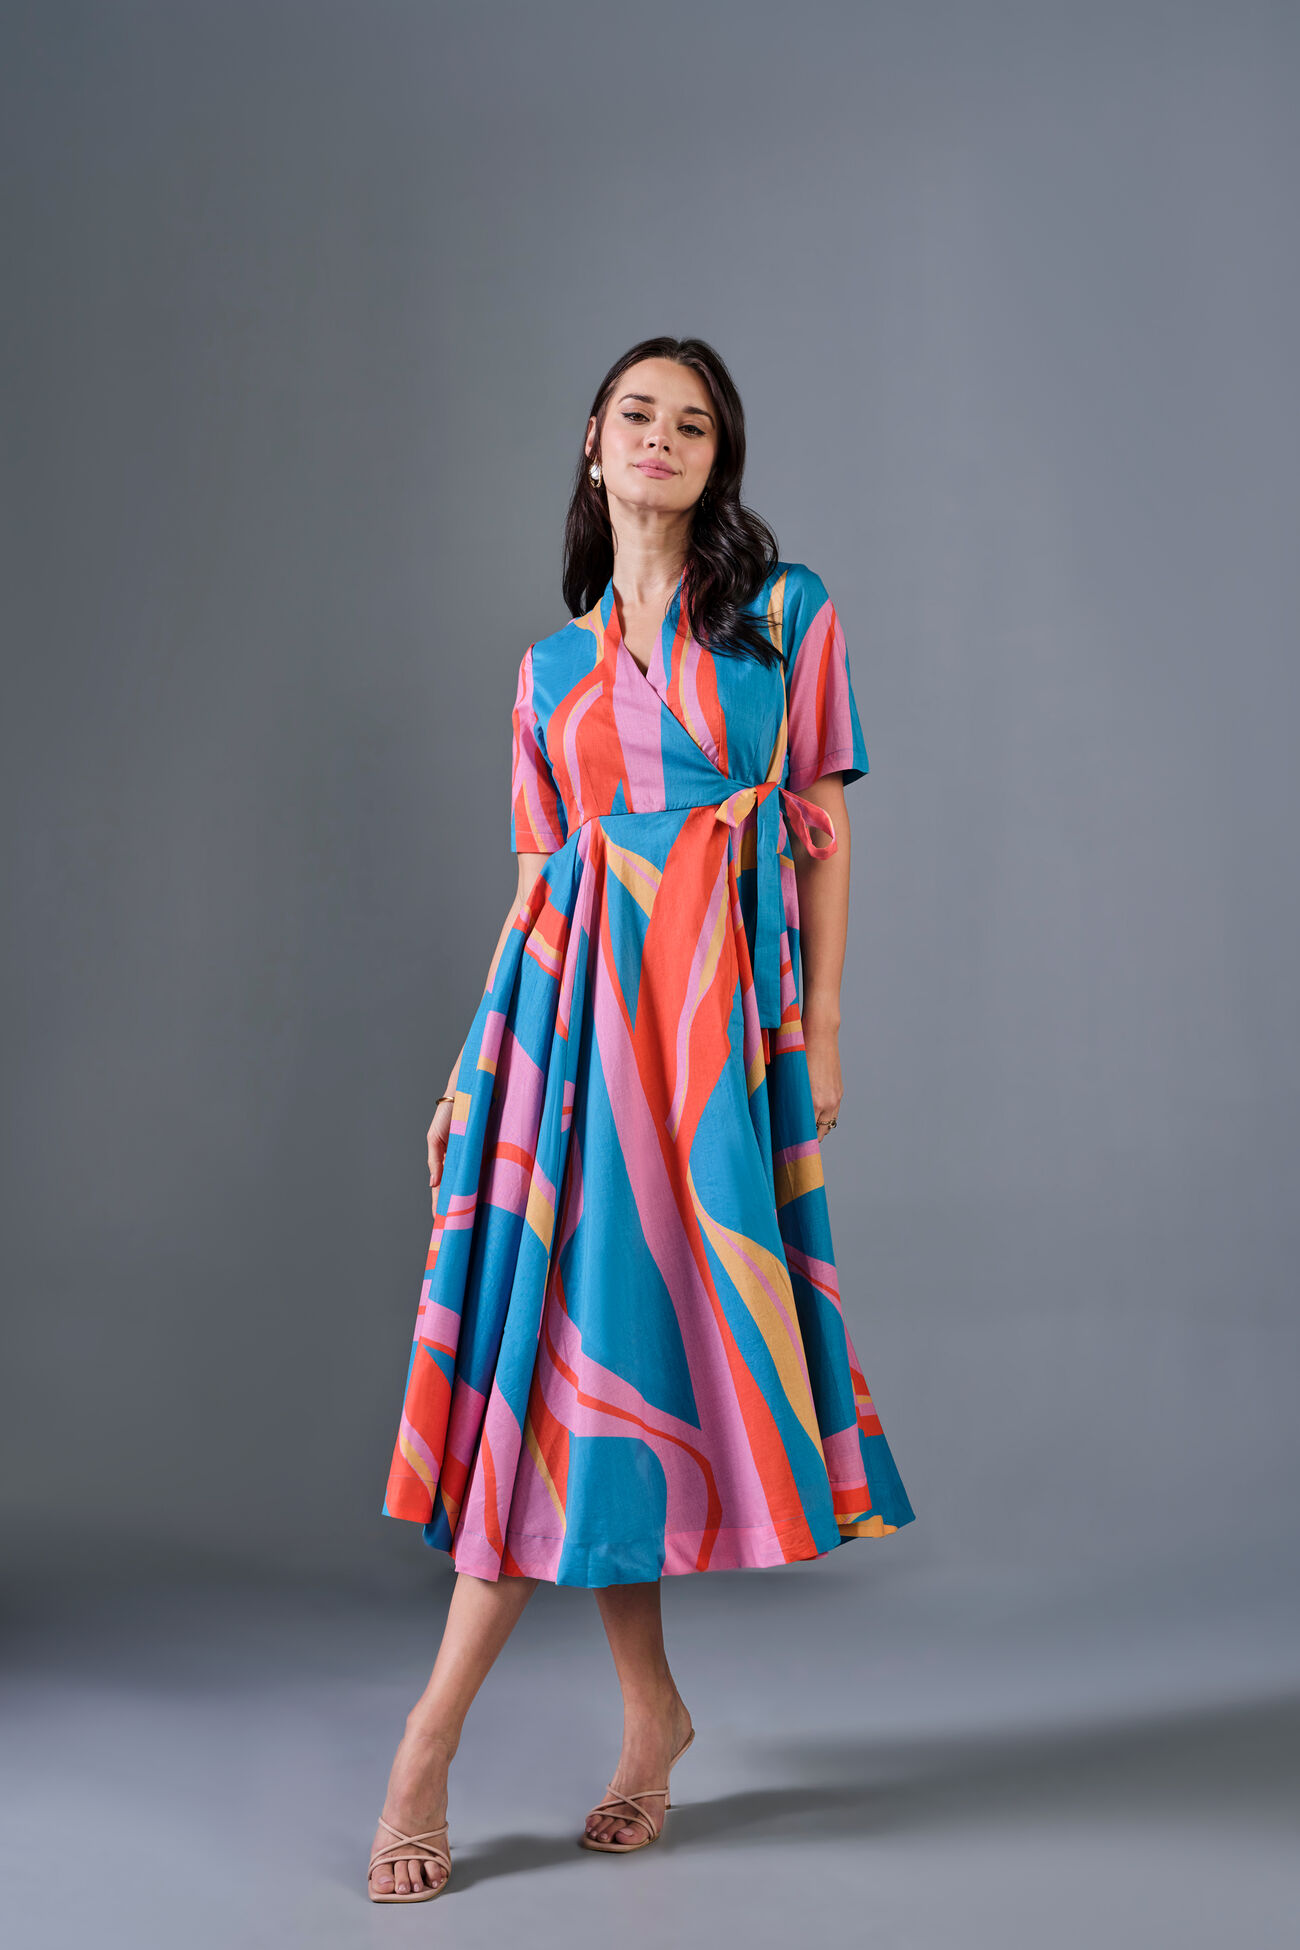 Abstract Swirls Cotton Dress, Multi Color, image 2